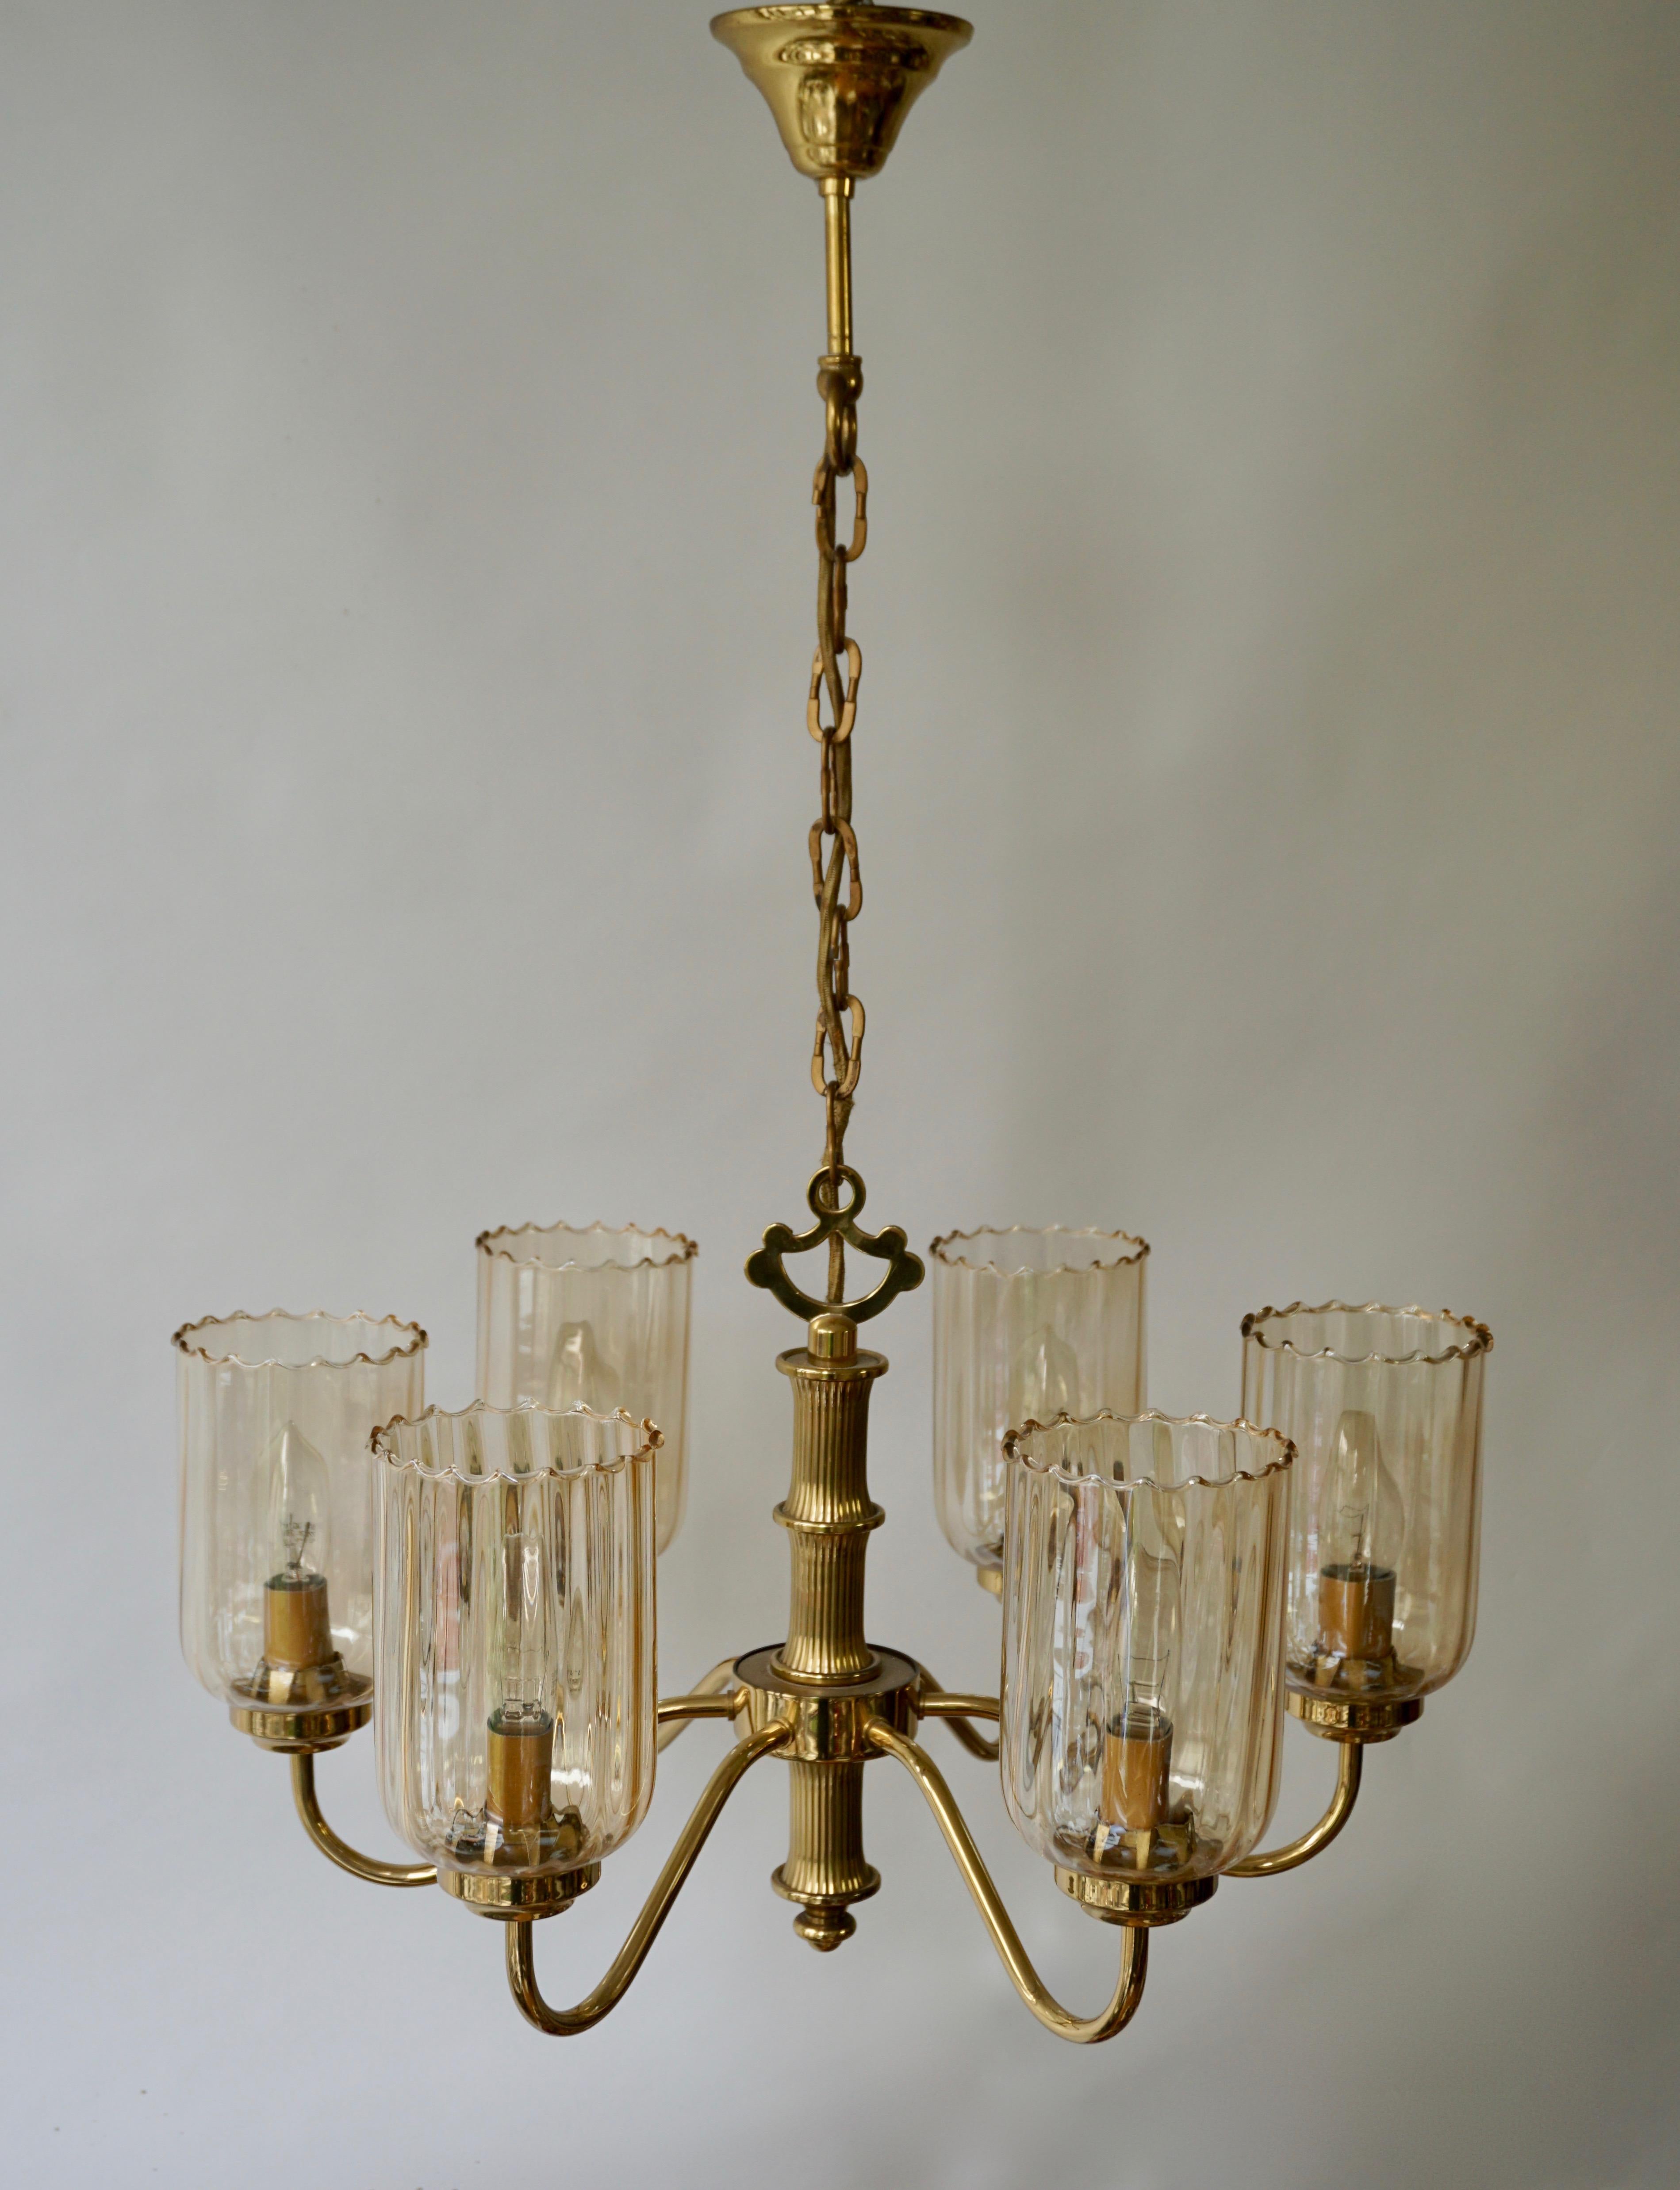 20th Century Murano Glass and Brass Chandelier 1970s Italy